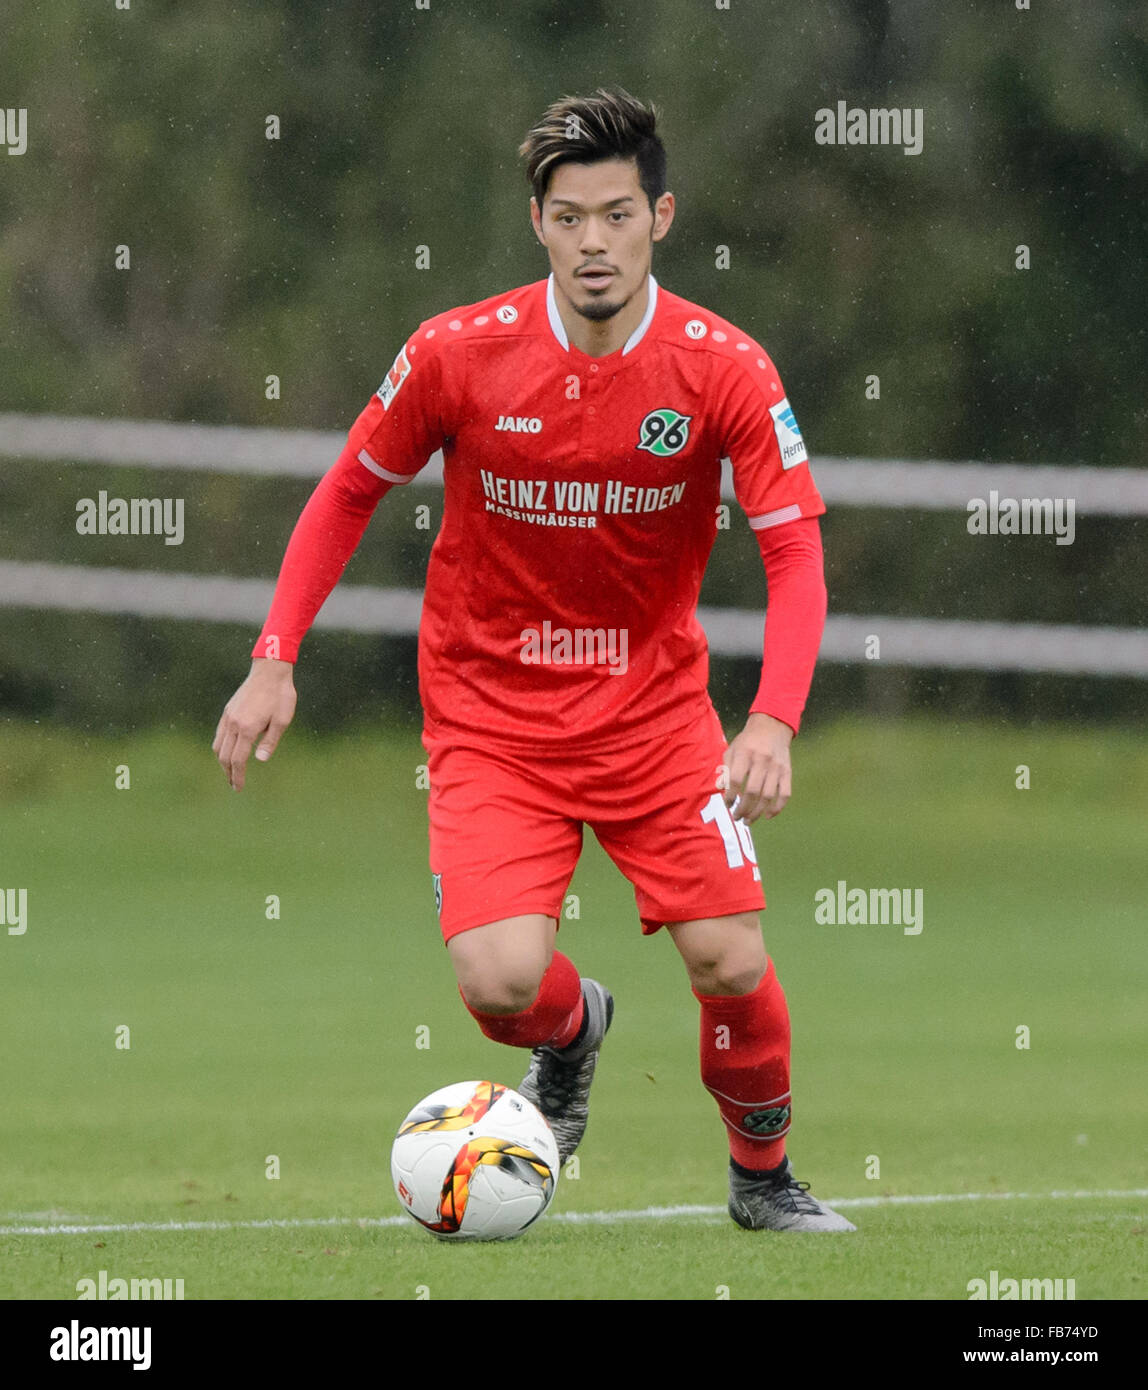 Belek, Turkey. 11th Jan, 2016. Hannover's Hotaru Yamaguchi is seen during a friendly match between Hannover 96 and SV Wehen Wiesbaden in Belek, Turkey, 11 January 2016. Hannover 96 are staying in Belek to prepare for the second half of the German Bundesliga season. Photo: THOMAS EISENHUTH/dpa/Alamy Live News Stock Photo